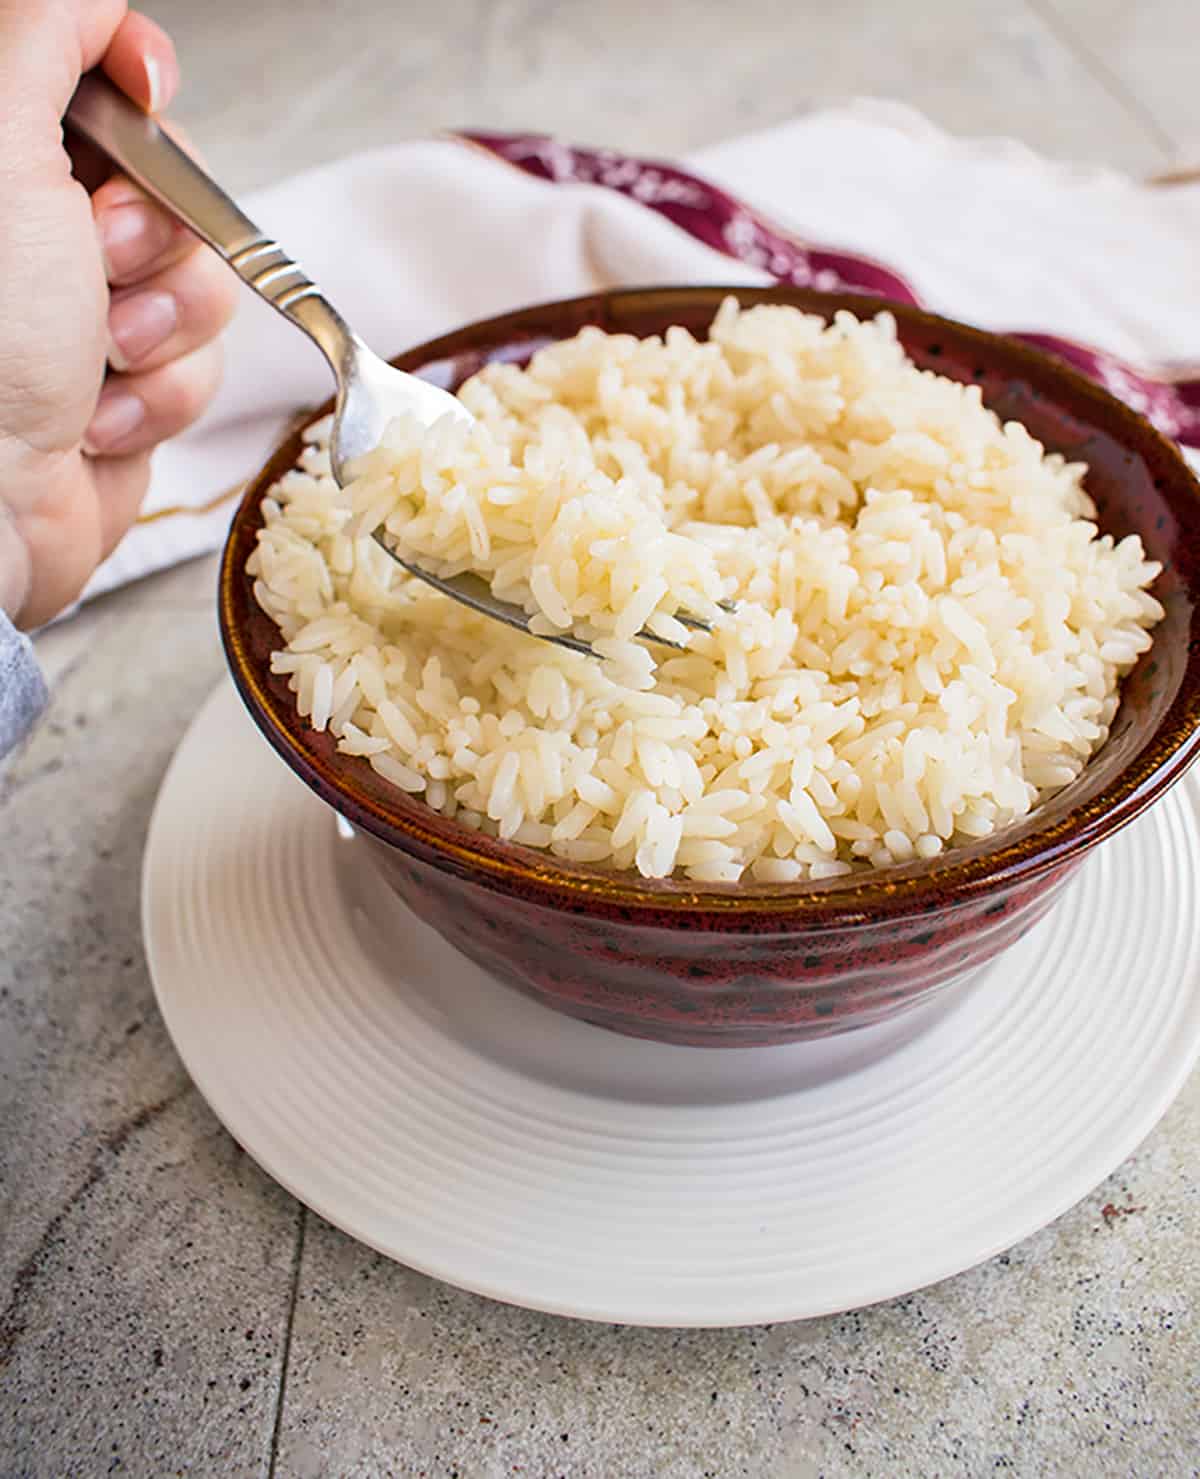 forkful of rice from bowl